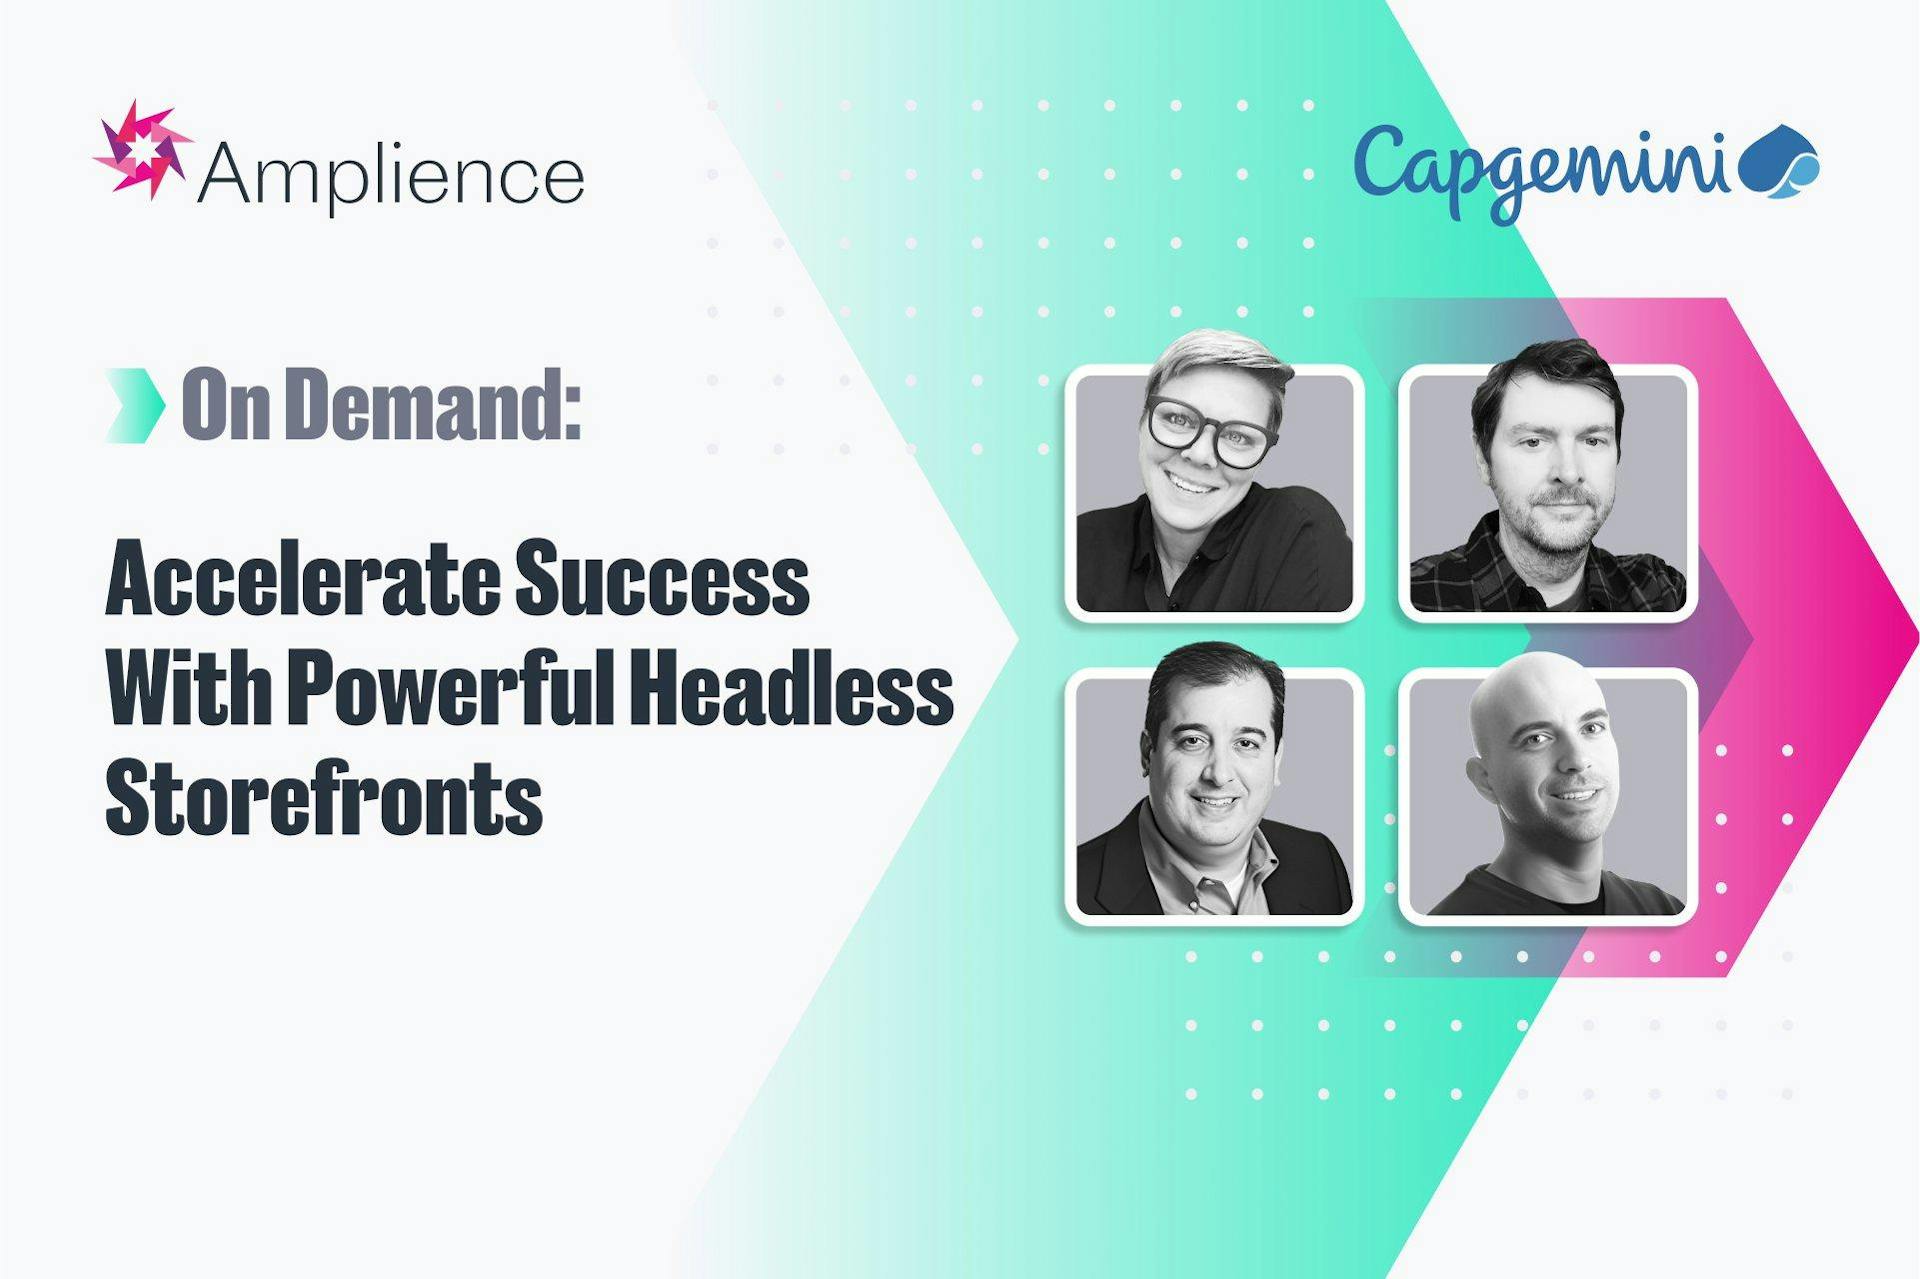 On Demand: Accelerate Success with Powerful Headless Storefronts